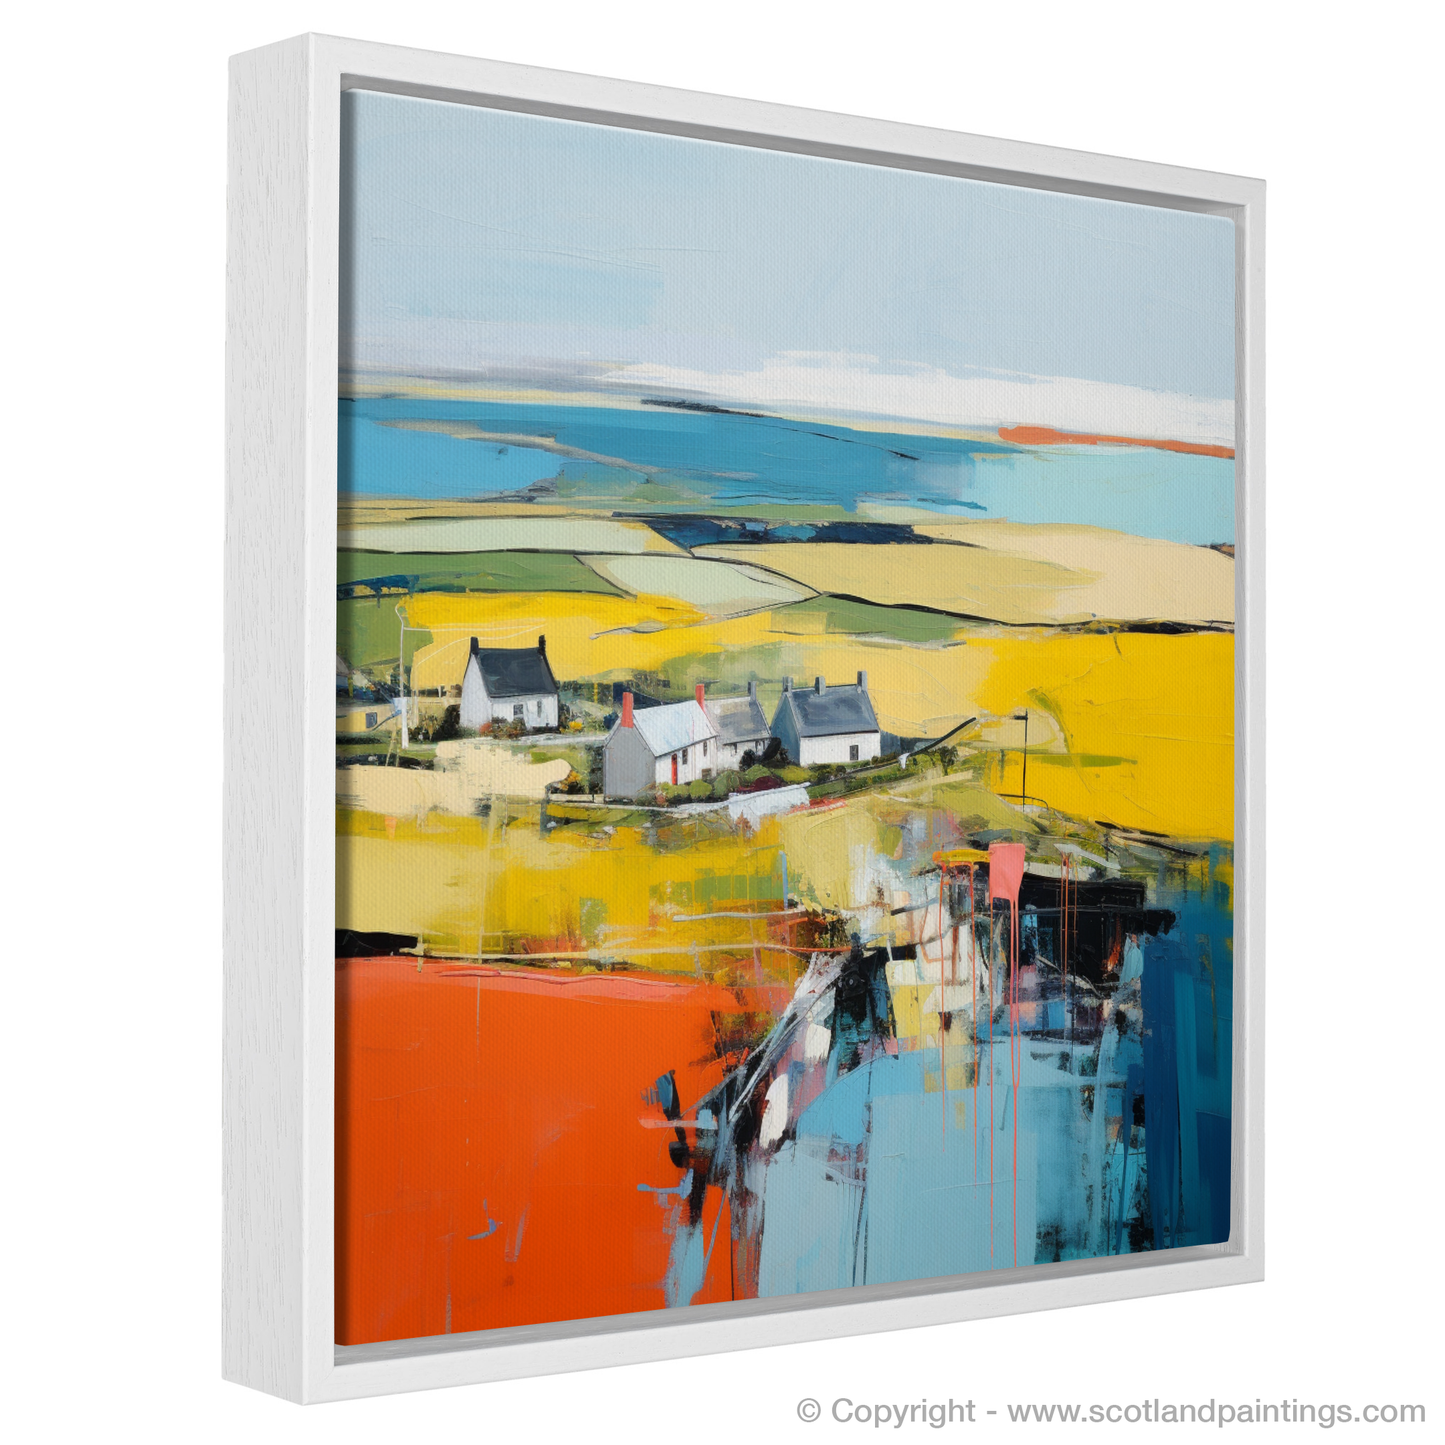 Painting and Art Print of Orkney, North of mainland Scotland in summer. Orkney Summer Serenade.